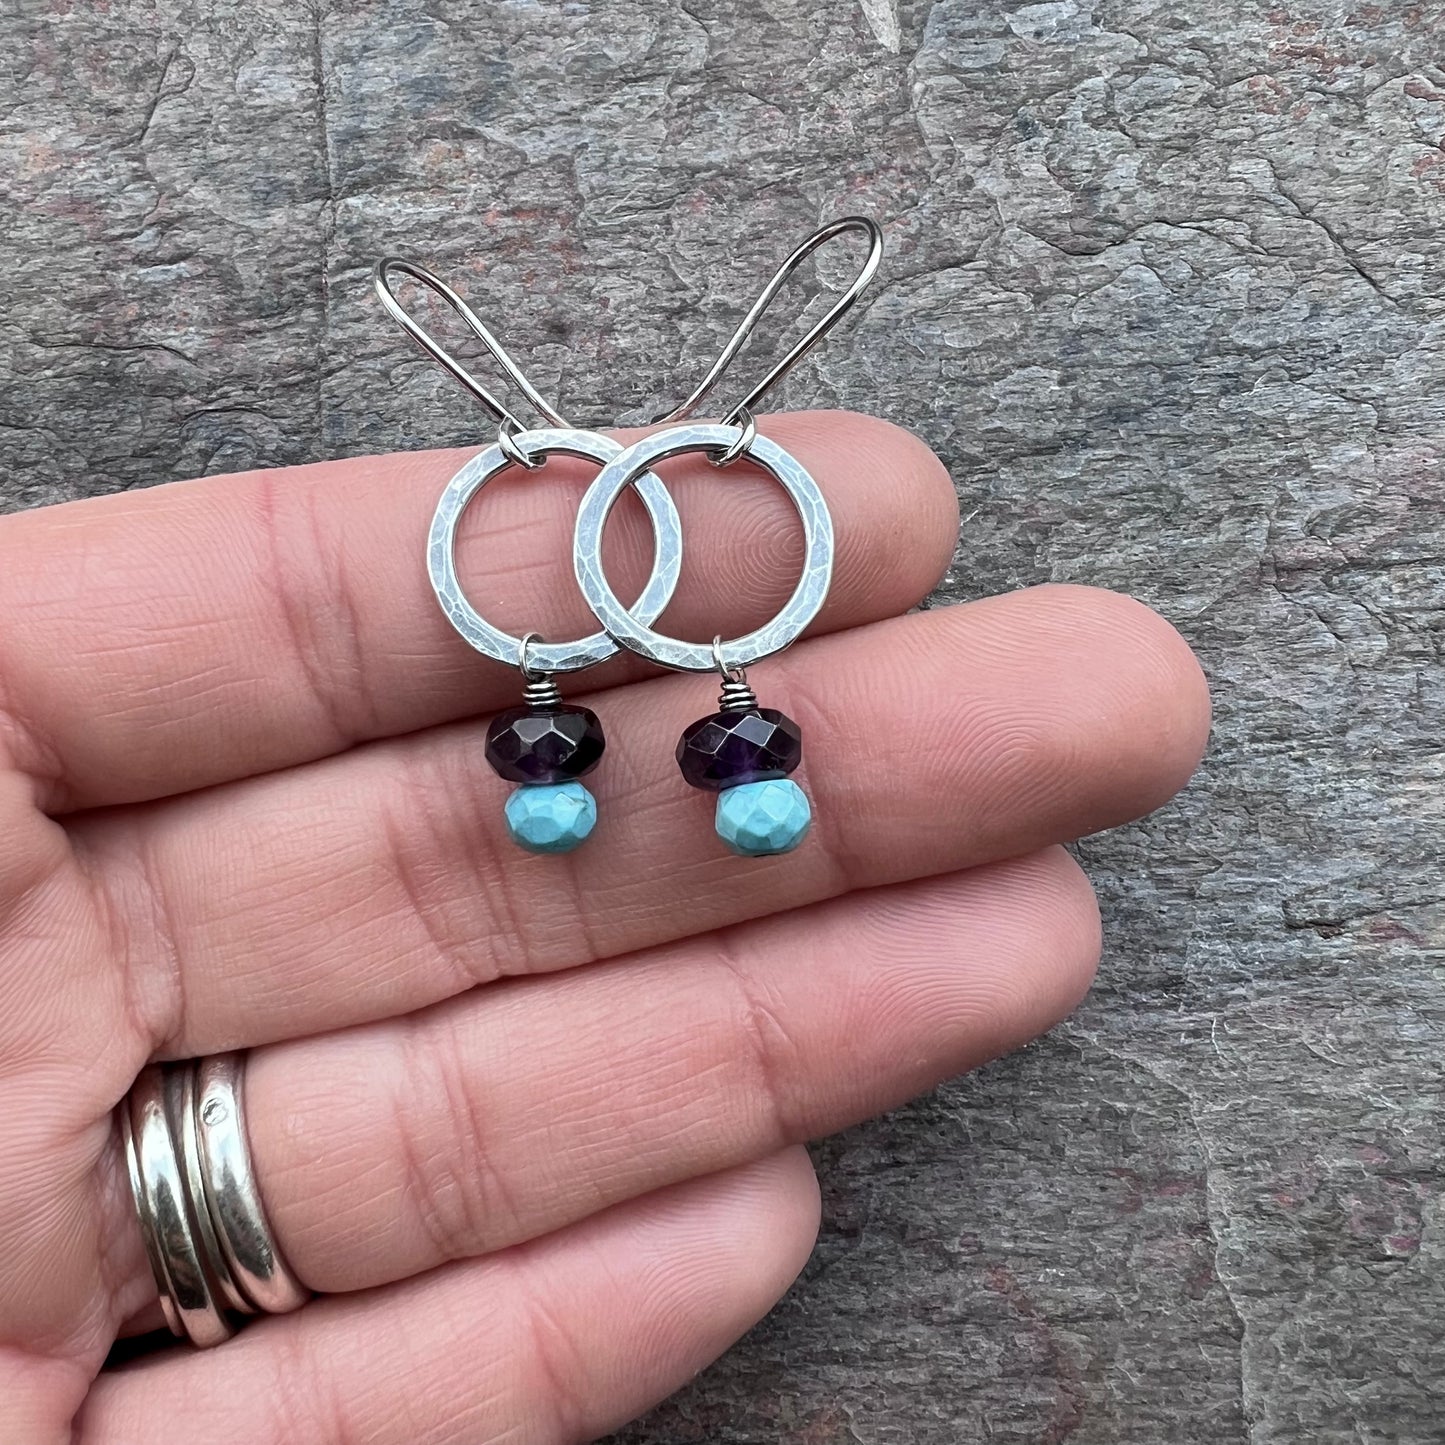 Amethyst and Turquoise Sterling Silver Earrings - Amethyst and Turquoise on Hammered Sterling Silver Rings